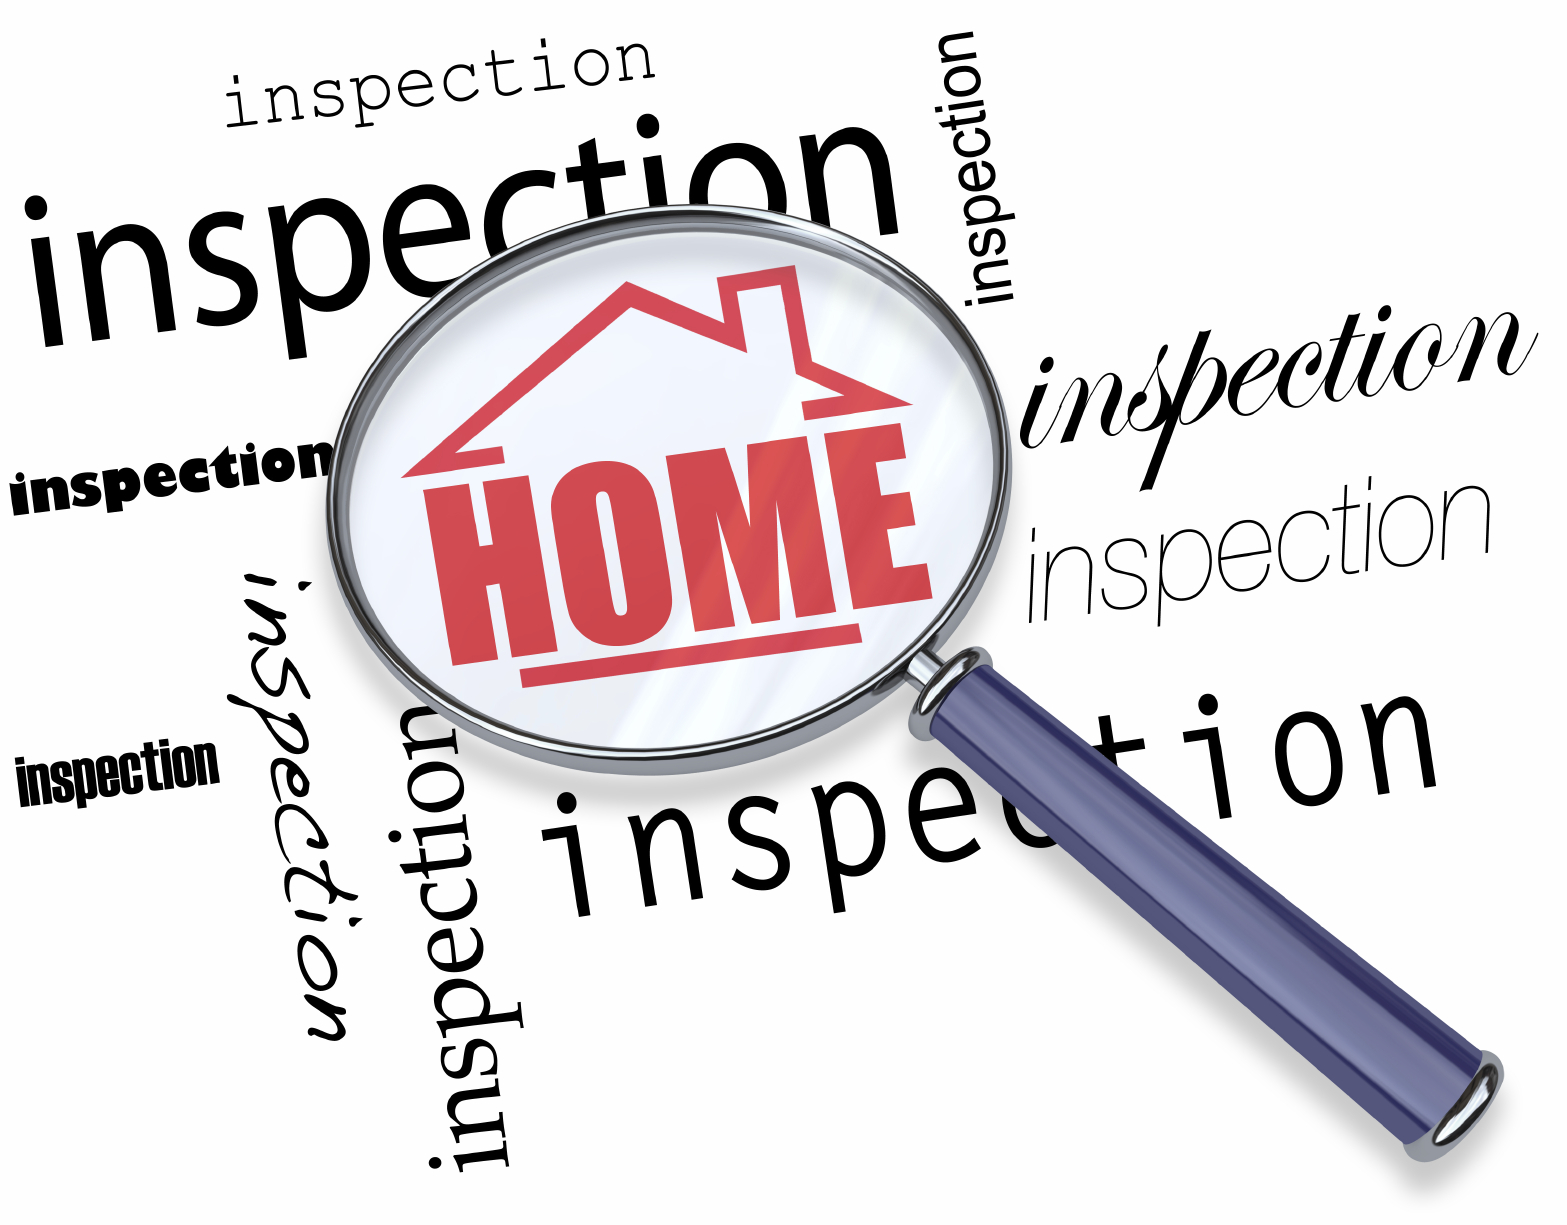 Memphis Real Estate Home Inspections